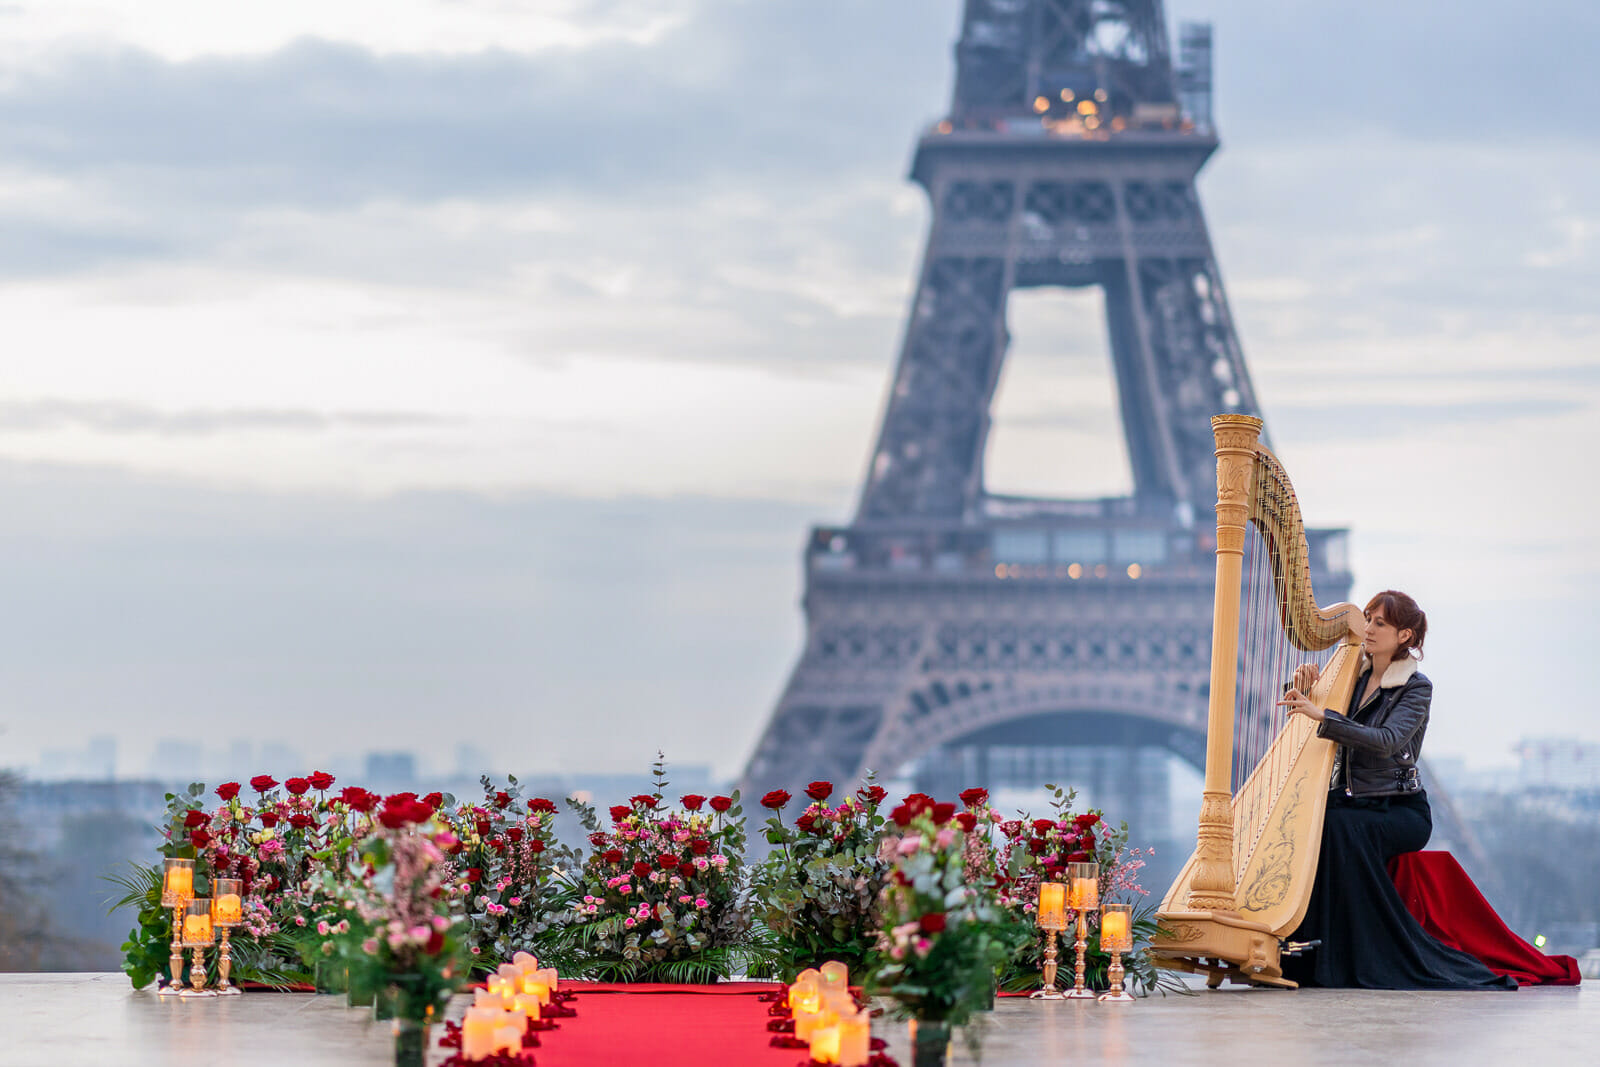 Eiffel Tower marriage proposal at Trocadero at sunrise with a harpist and luxury setting